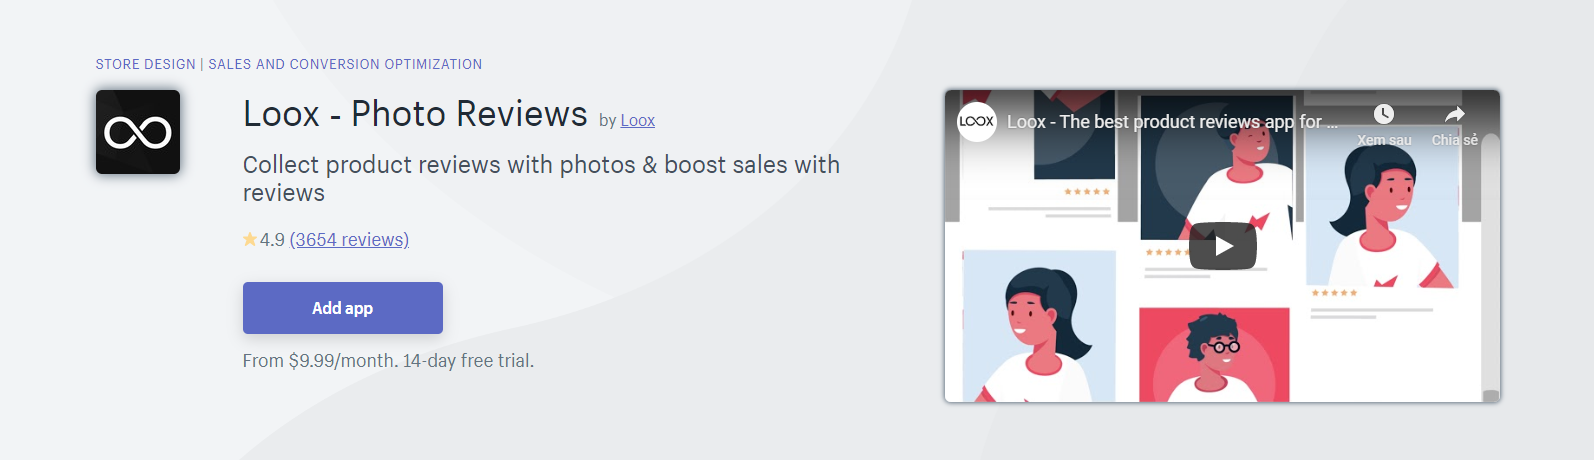 Best Shopify apps: Loox - Collect photo reviews